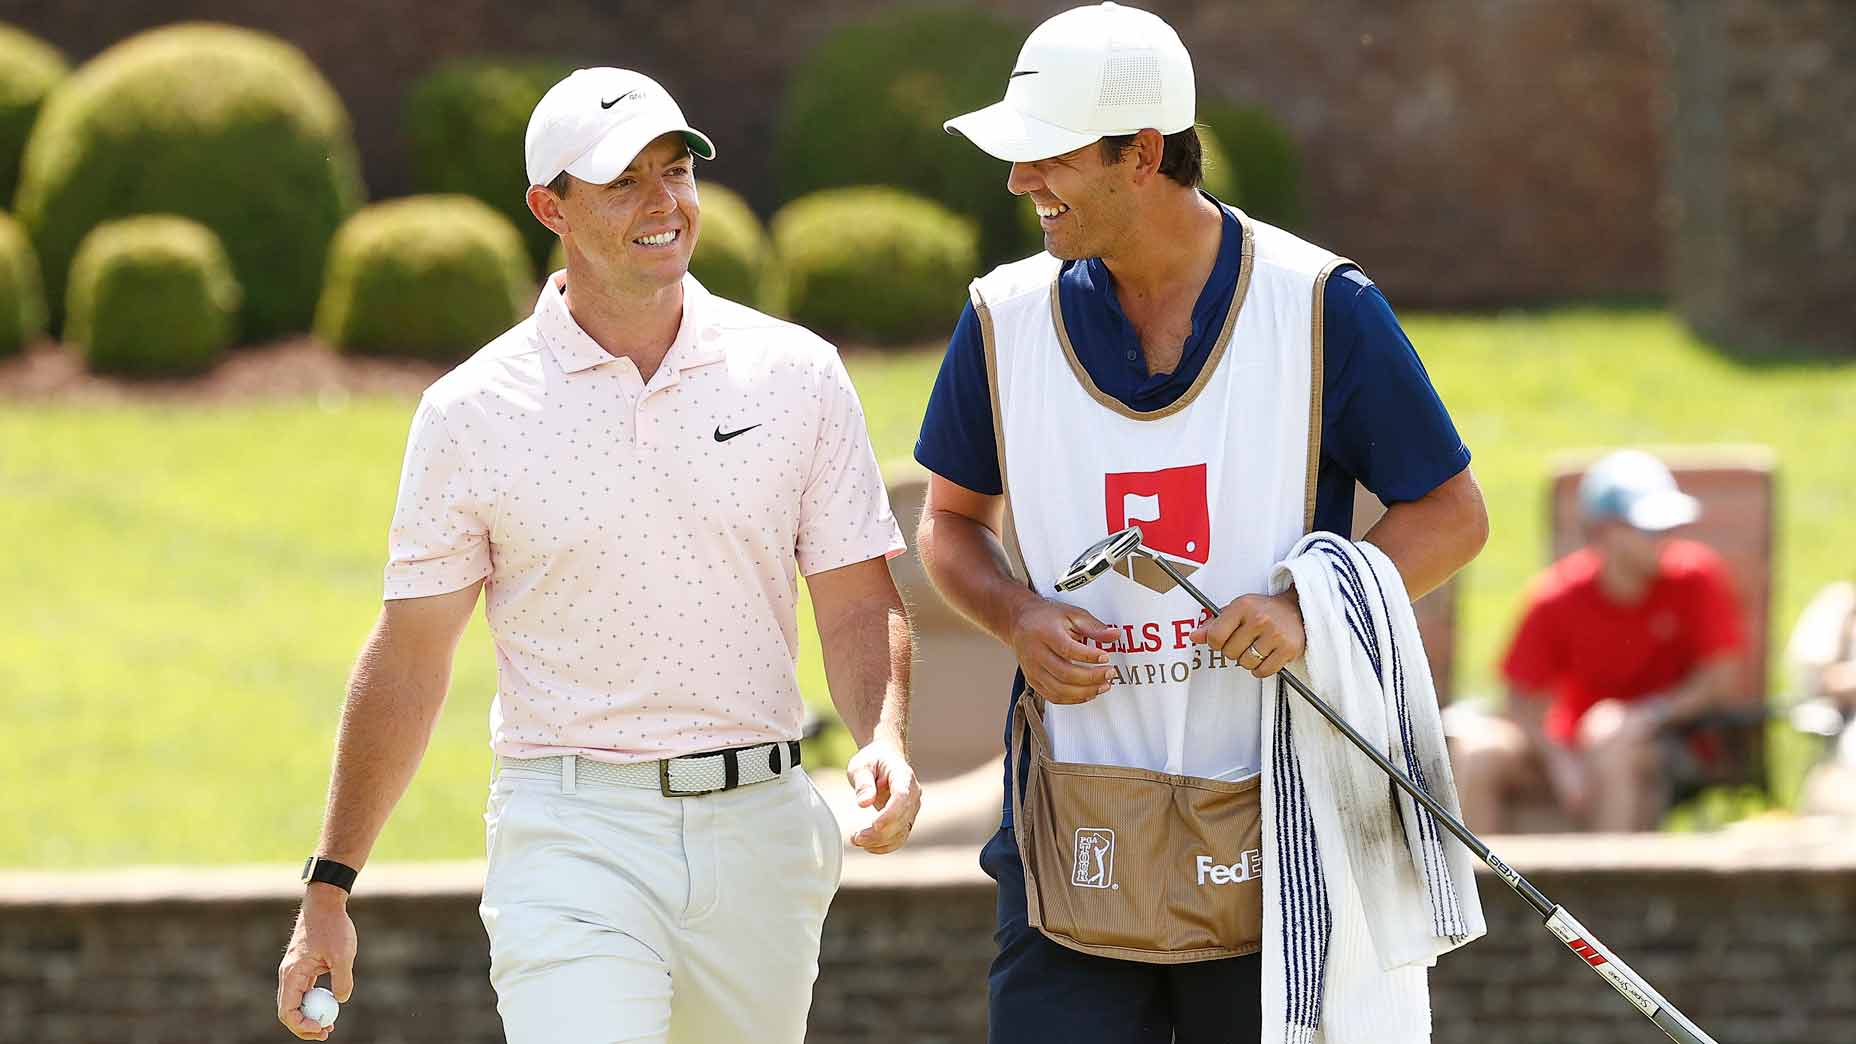 Rory McIlroy walks with a caddy during the 2021 Wells Fargo Championship